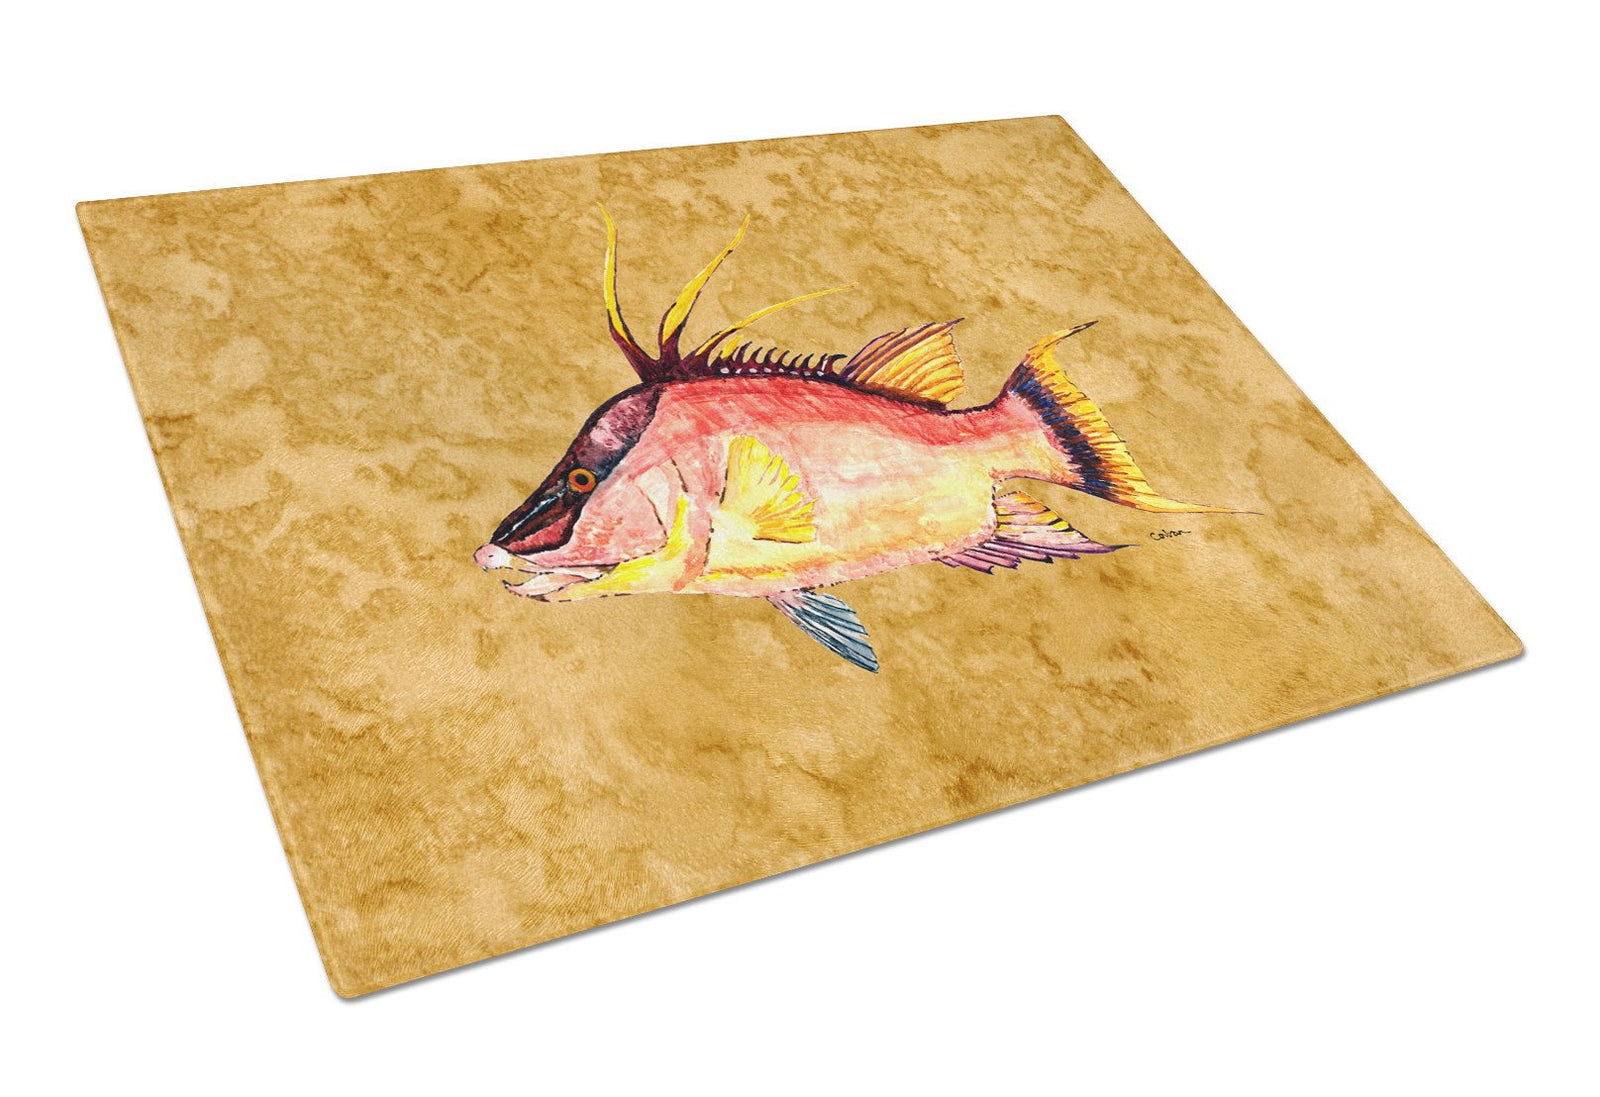 Hog Snapper on Gold Glass Cutting Board Large 8751LCB by Caroline's Treasures